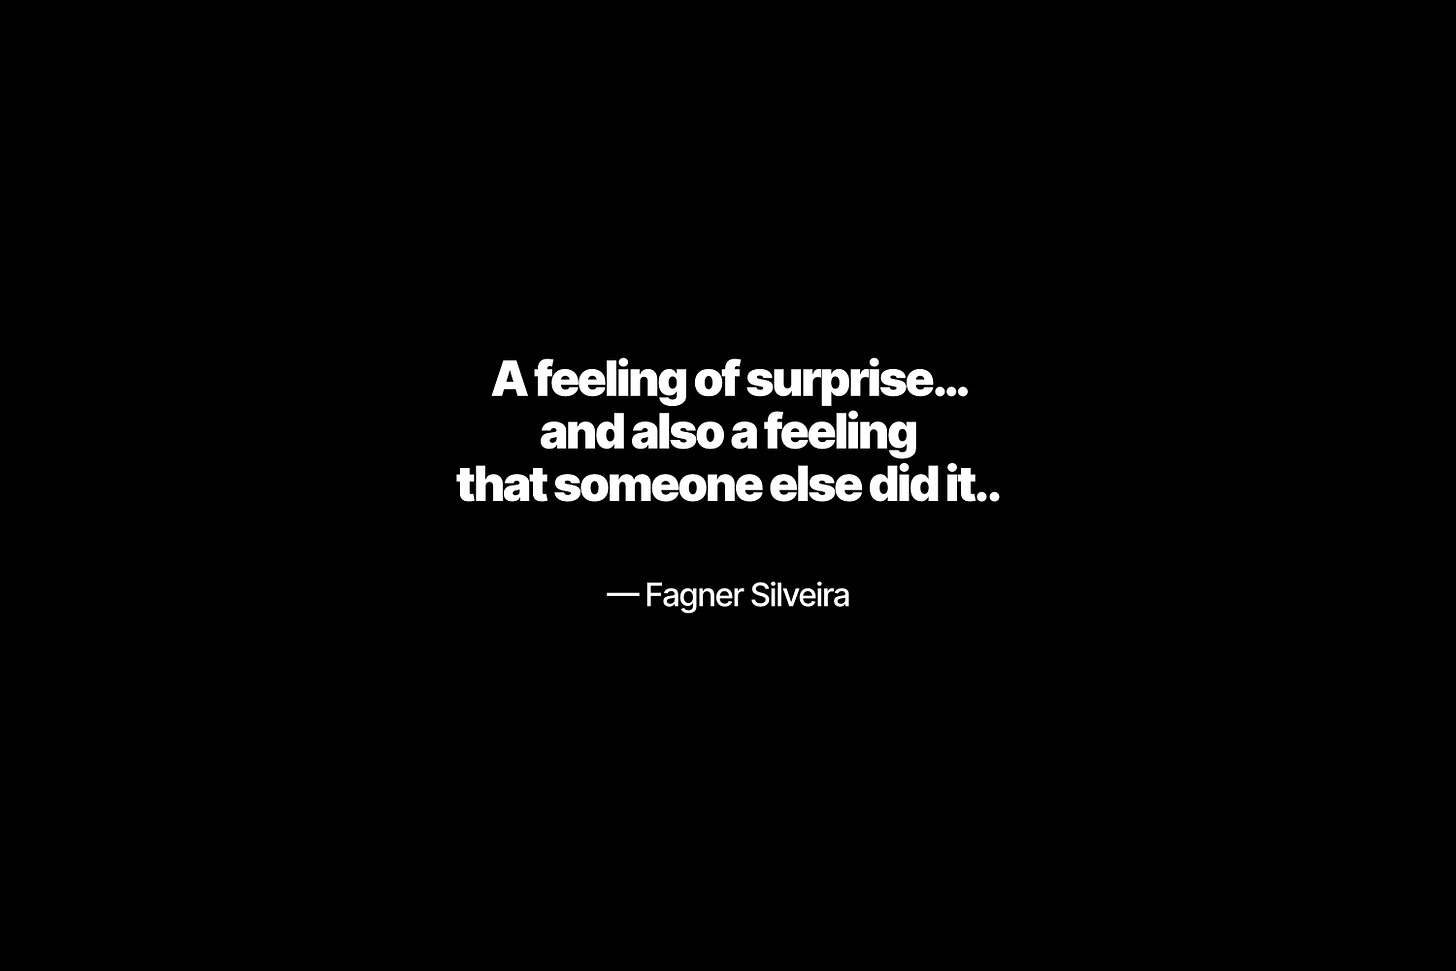 “A feeling of surprise… and also a feeling that someone else did it.” – Fagner Silveira